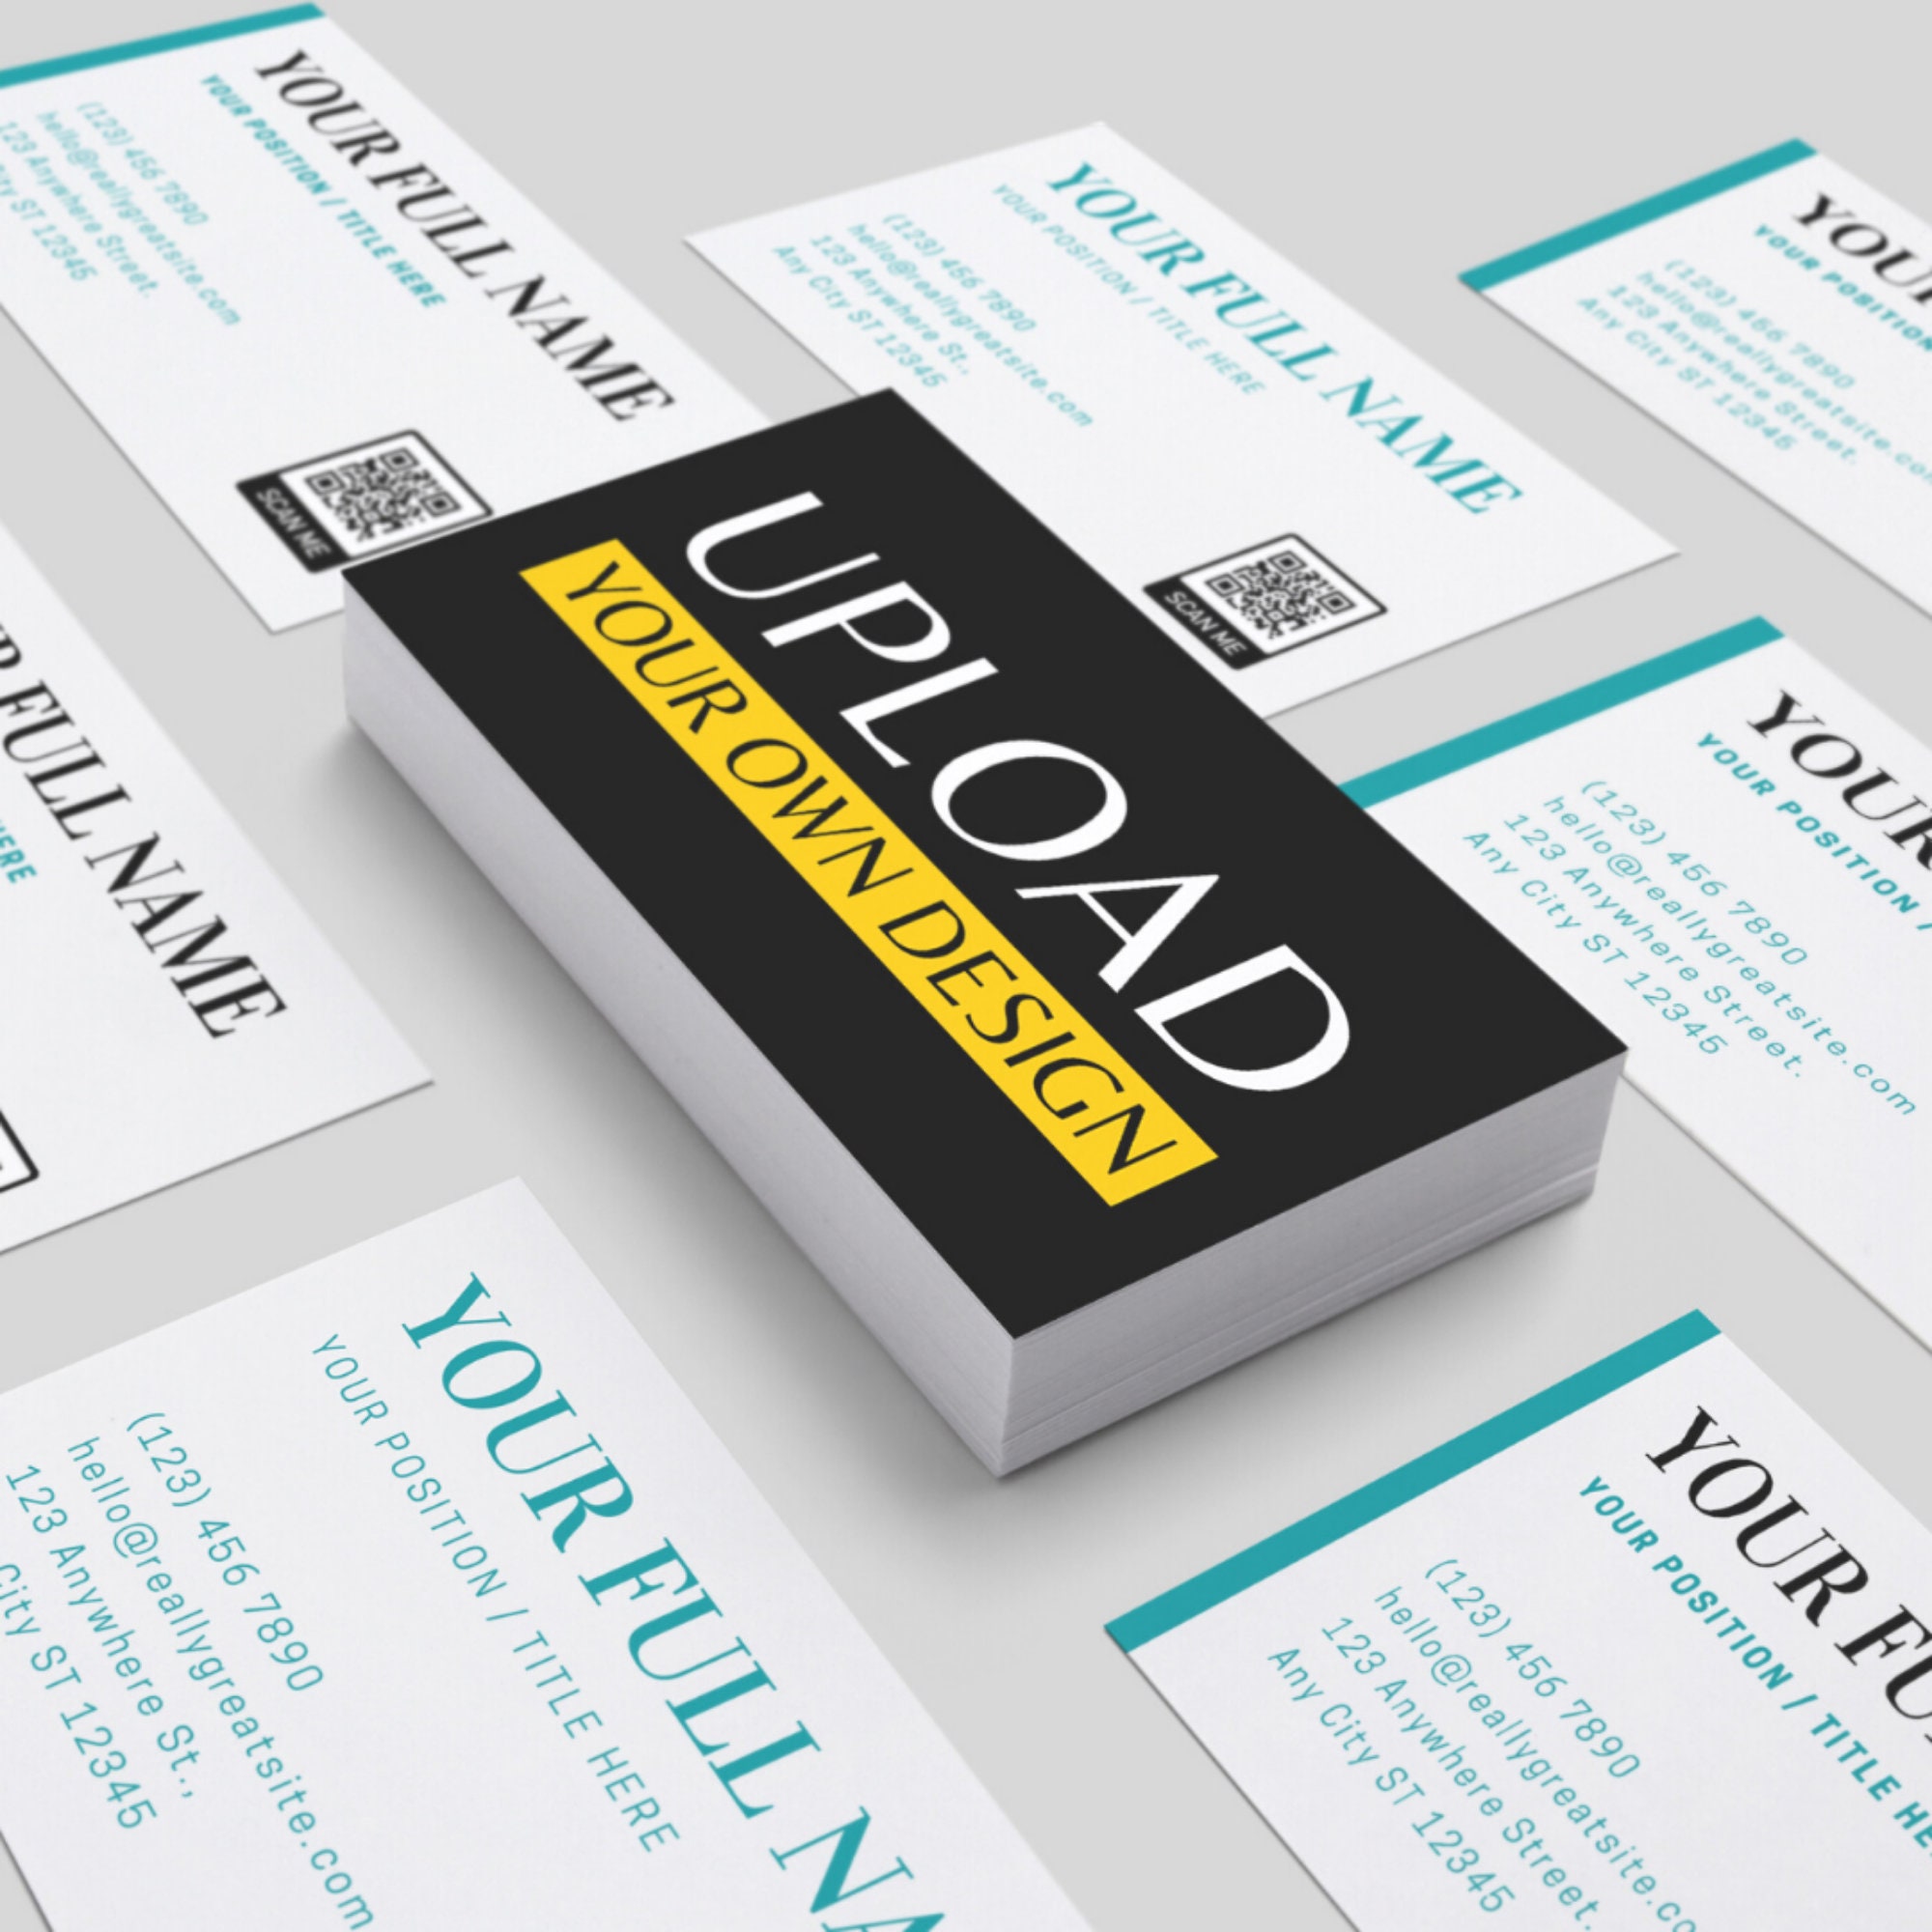 Custom Printed Business Cards Double-Sided Printed Business Cards 16PT 50 75 100 250 500 750 1000 + Matte & UV Glossy FREE Shipping